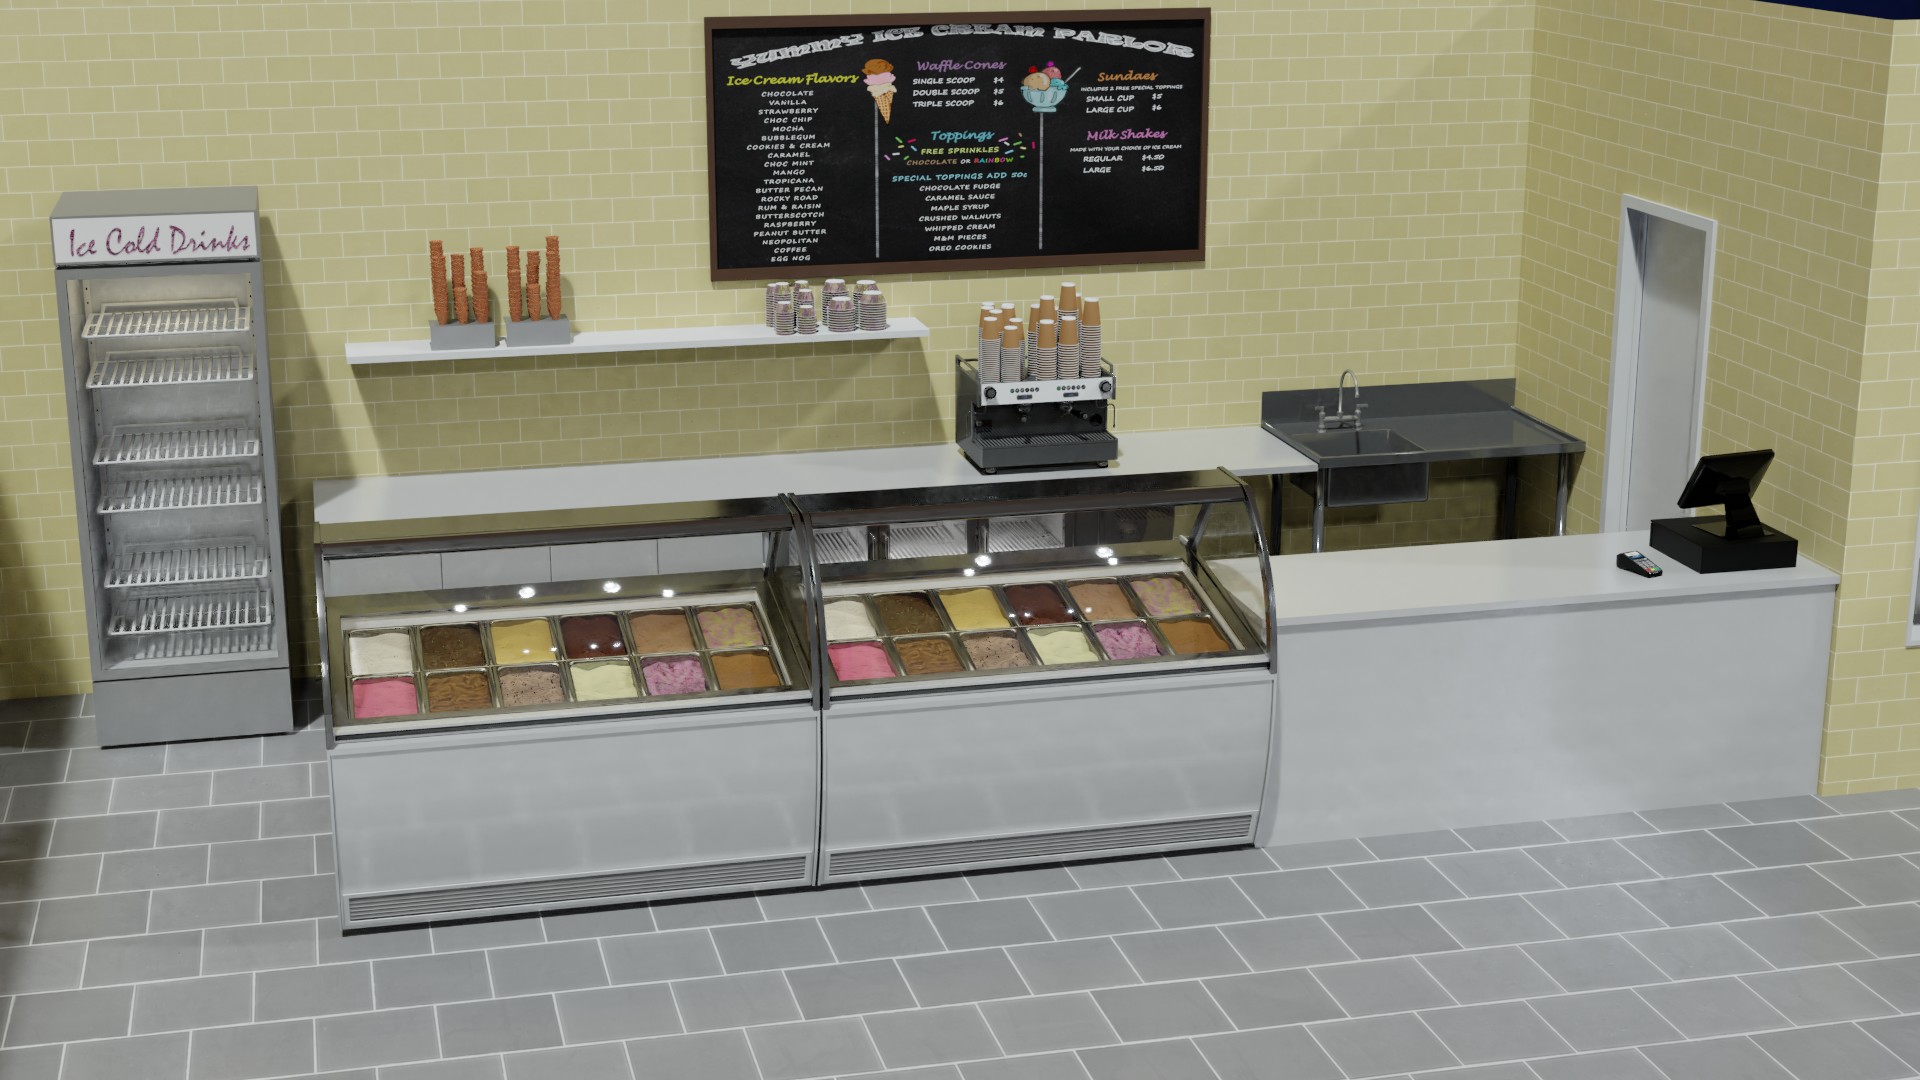 How to fitting a small ice cream shop